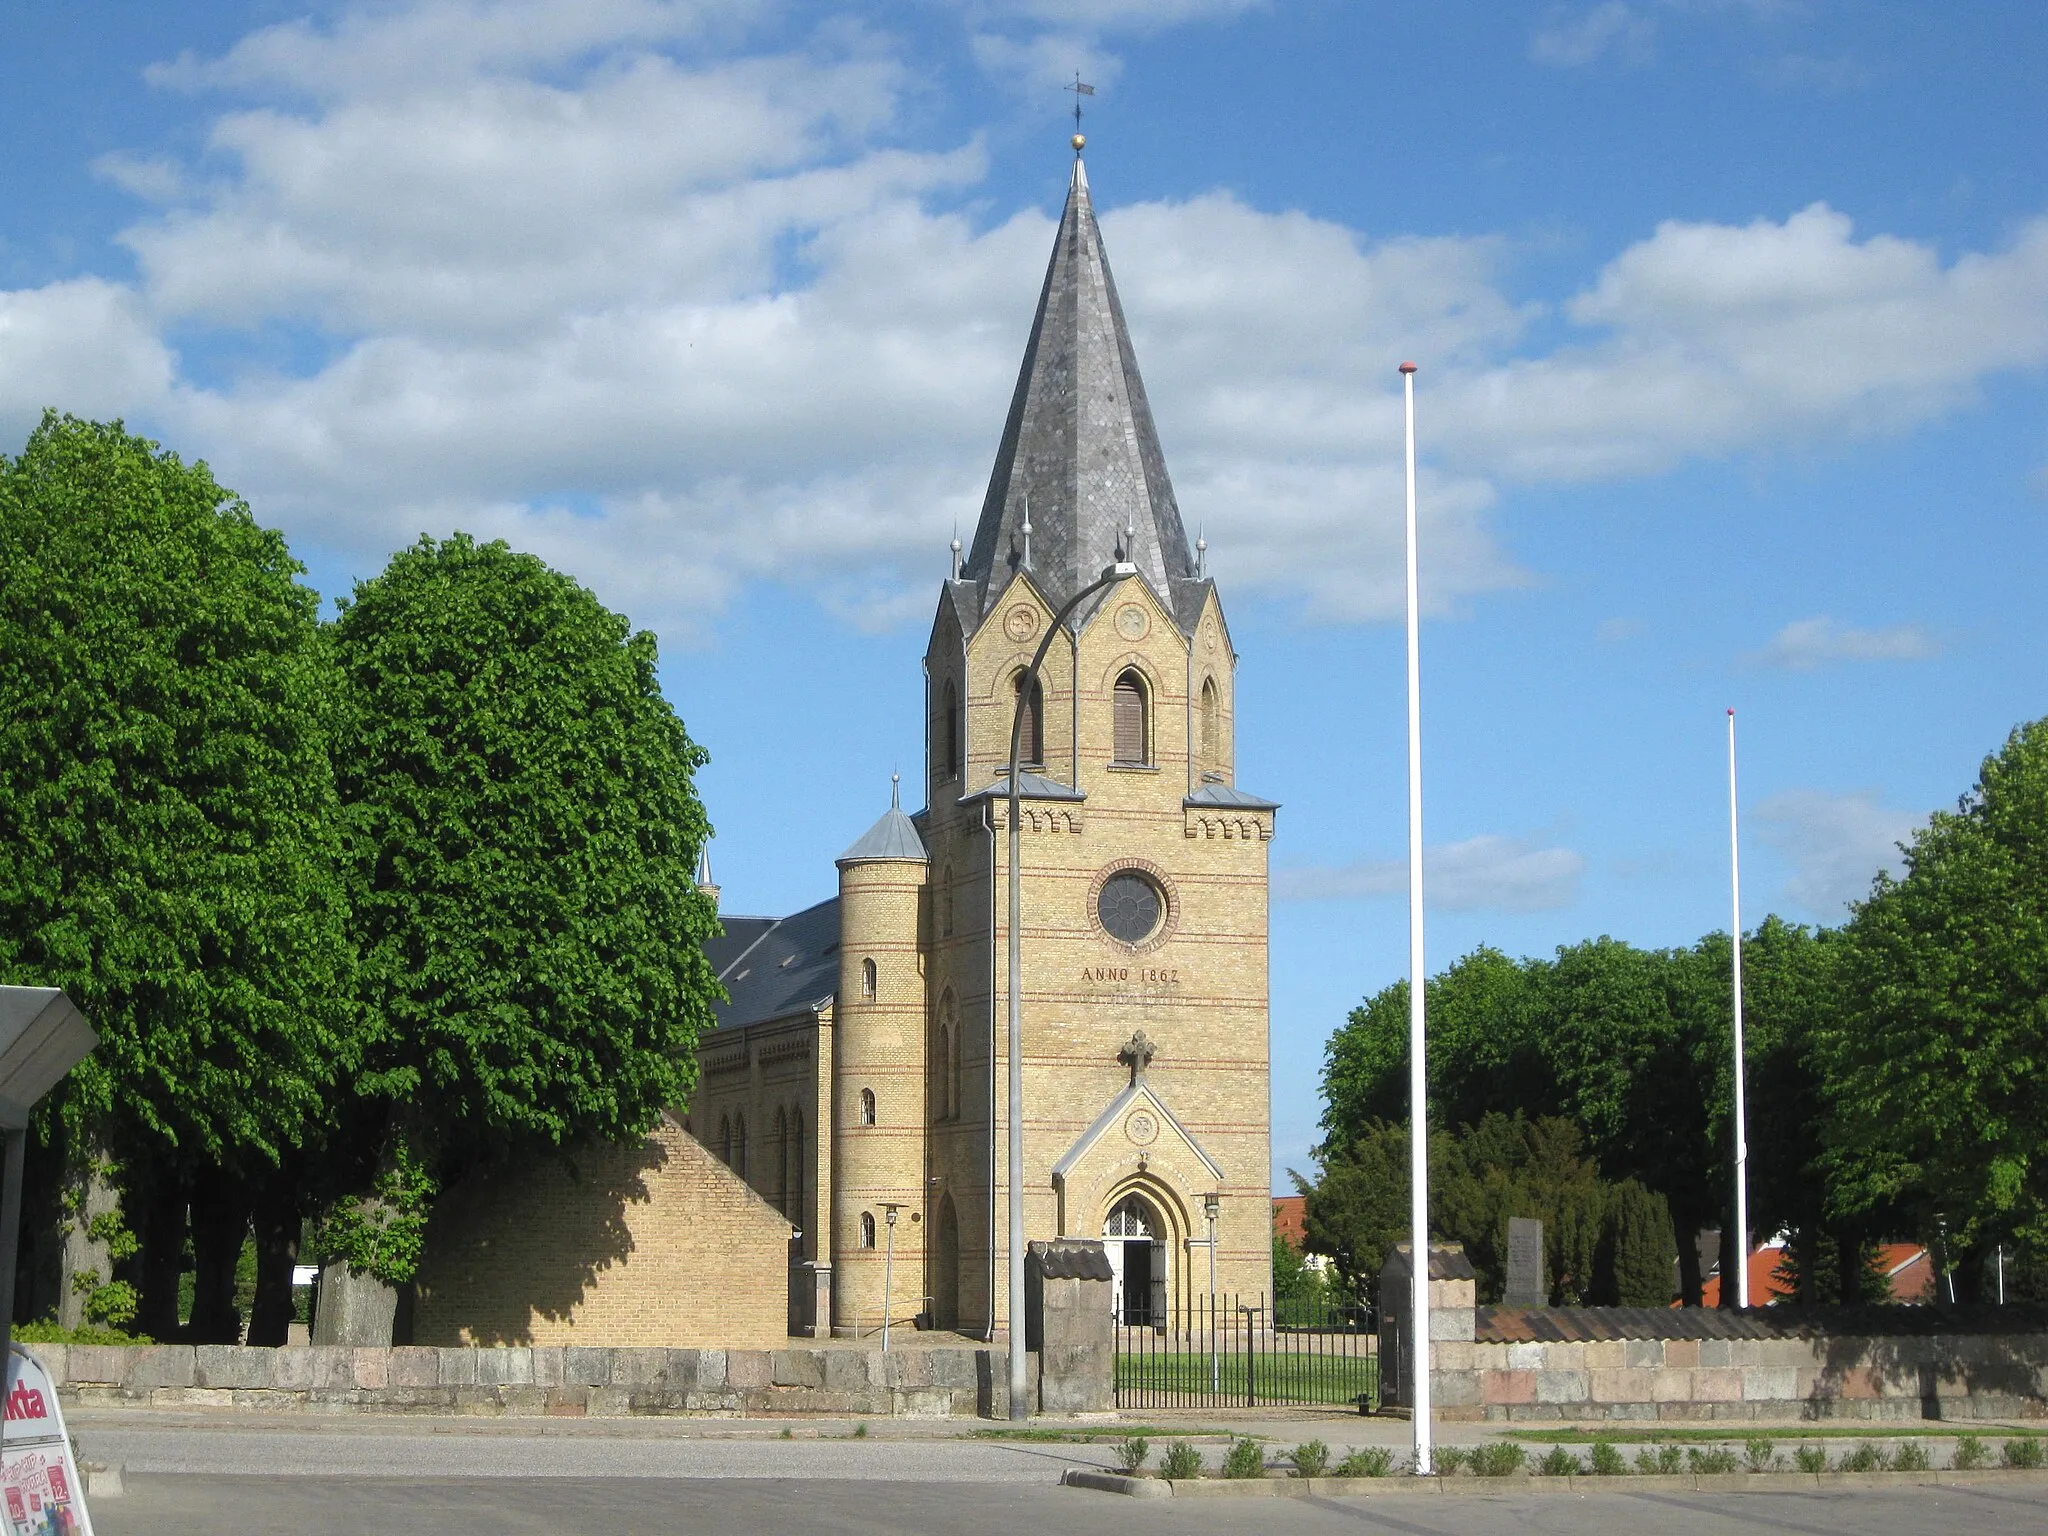 Photo showing: The church "Tyrstrup Kirke" in the small town "Christiansfeld". The town is located in Southern Jutland, Denmark.